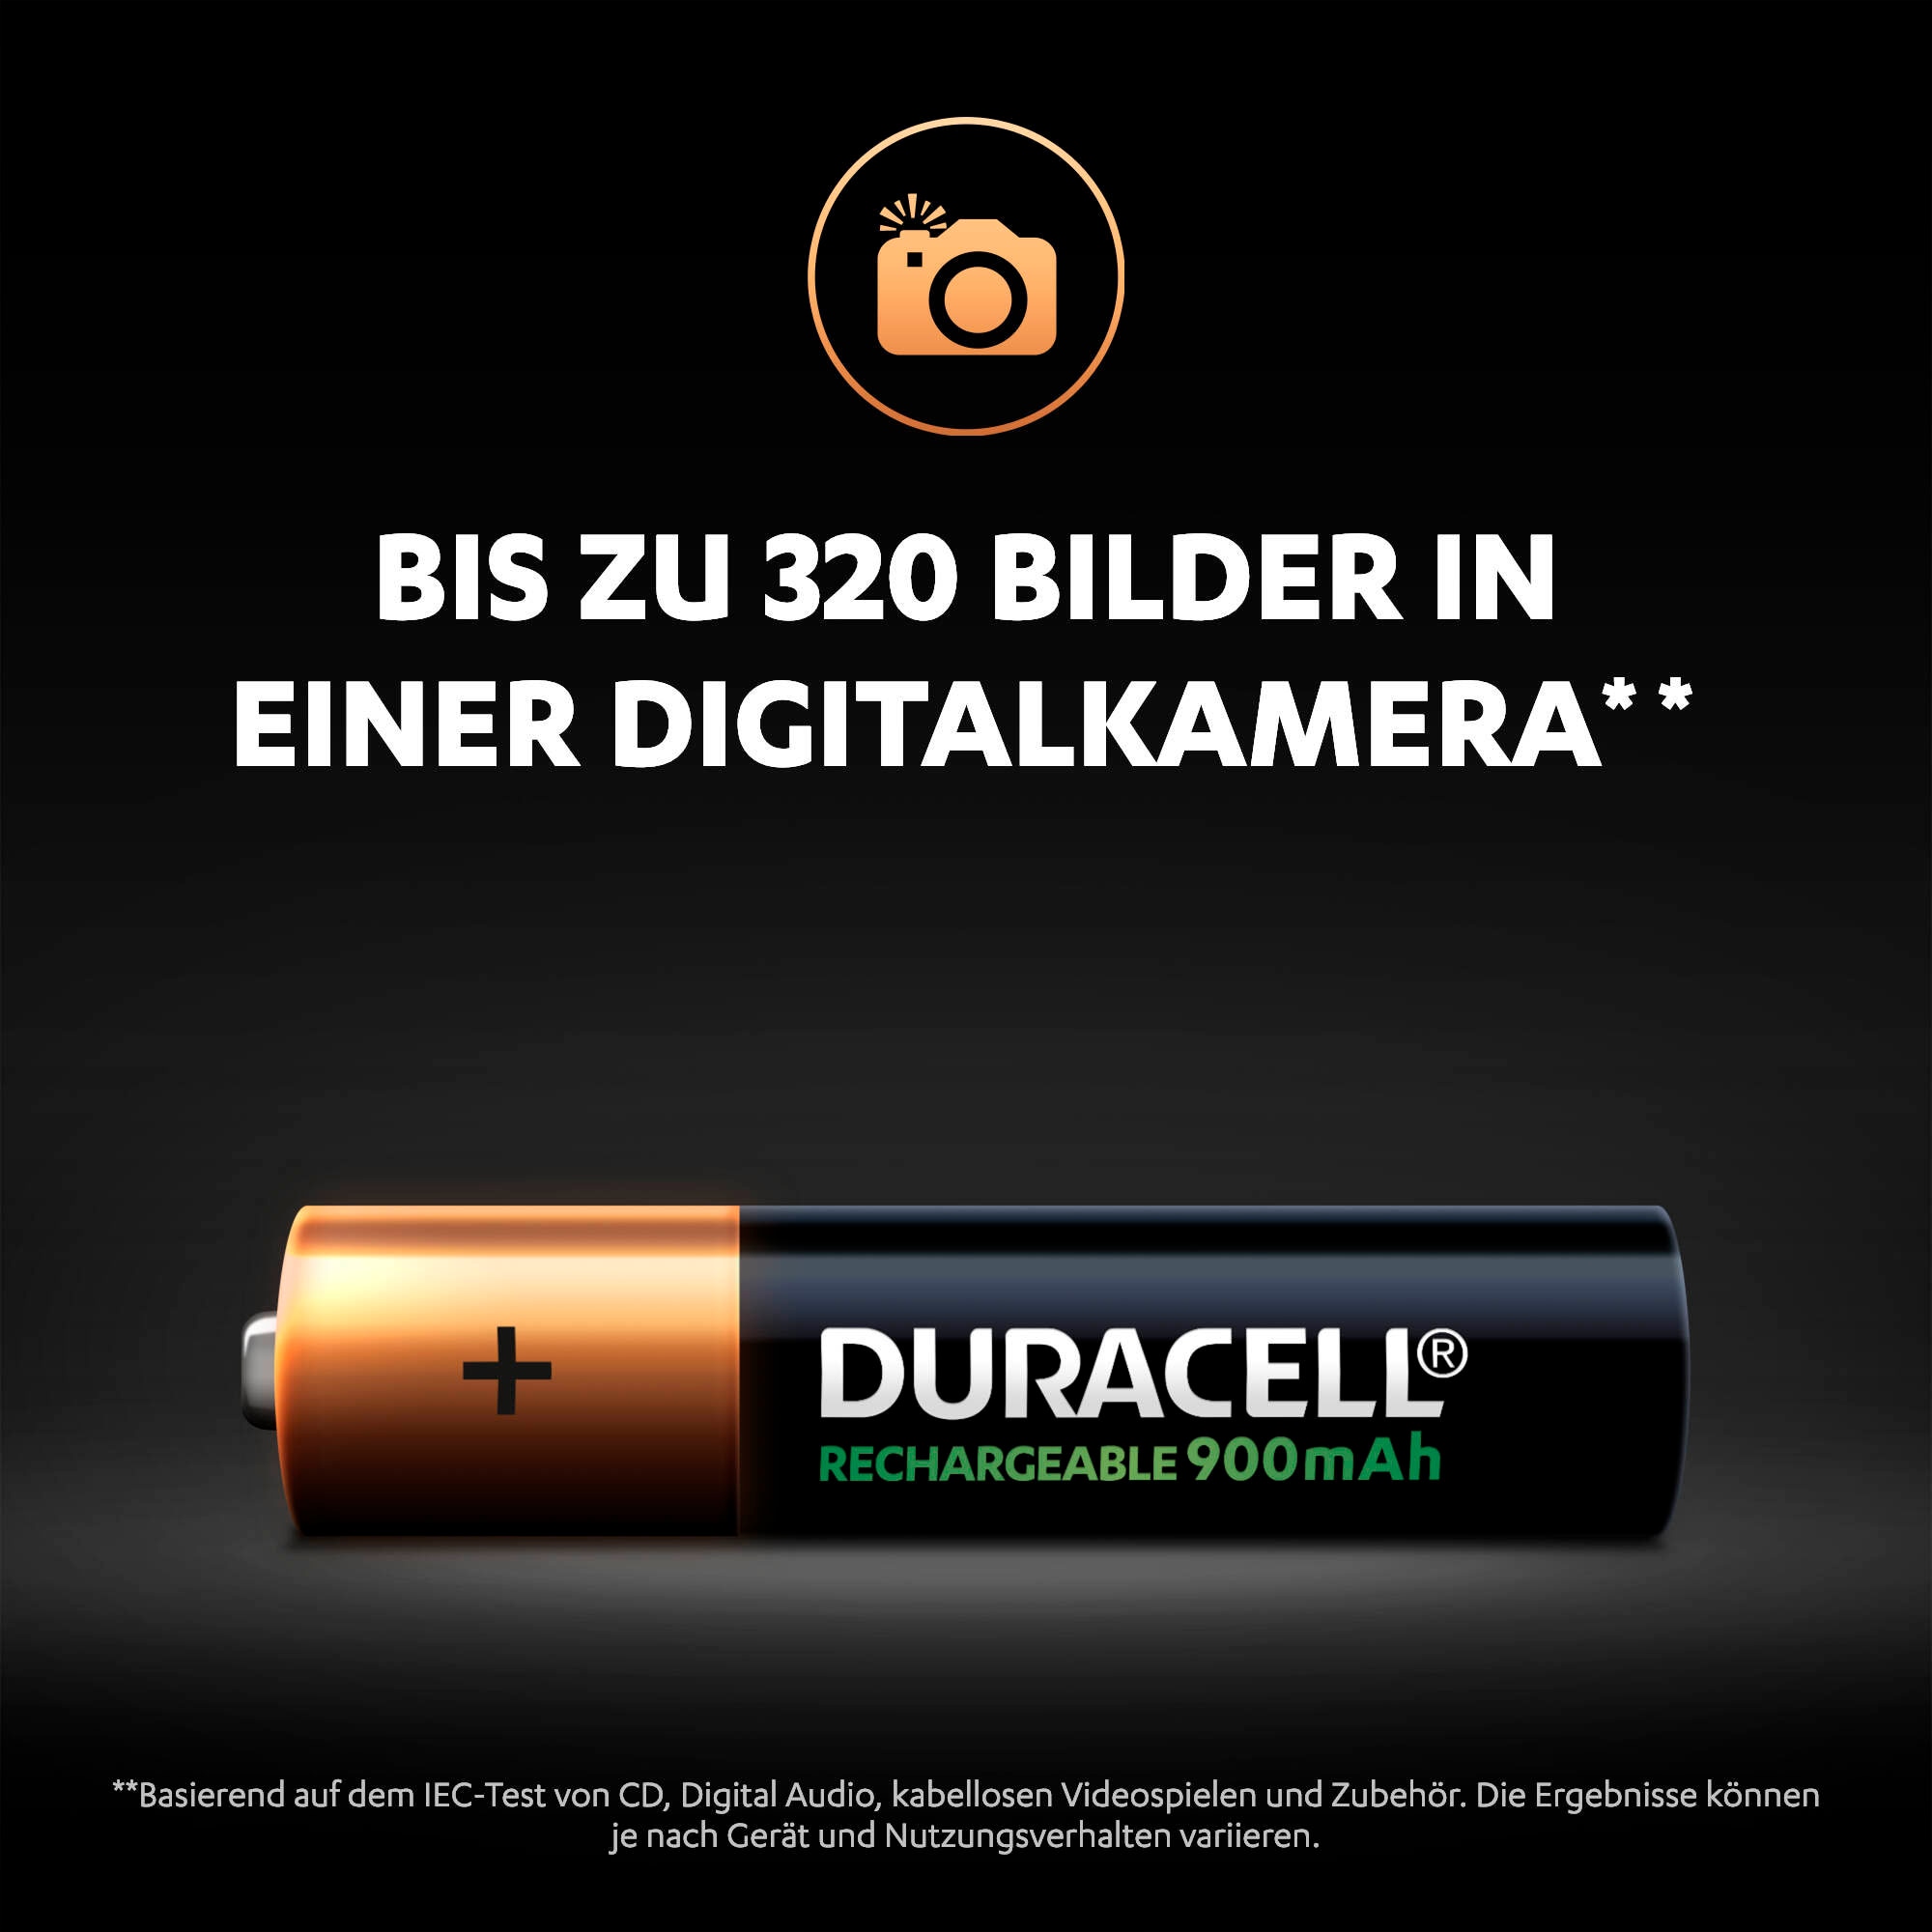 Duracell Batterie »4er Pack Rechargeable AAA 900mAh«, (Packung, 4 St.)